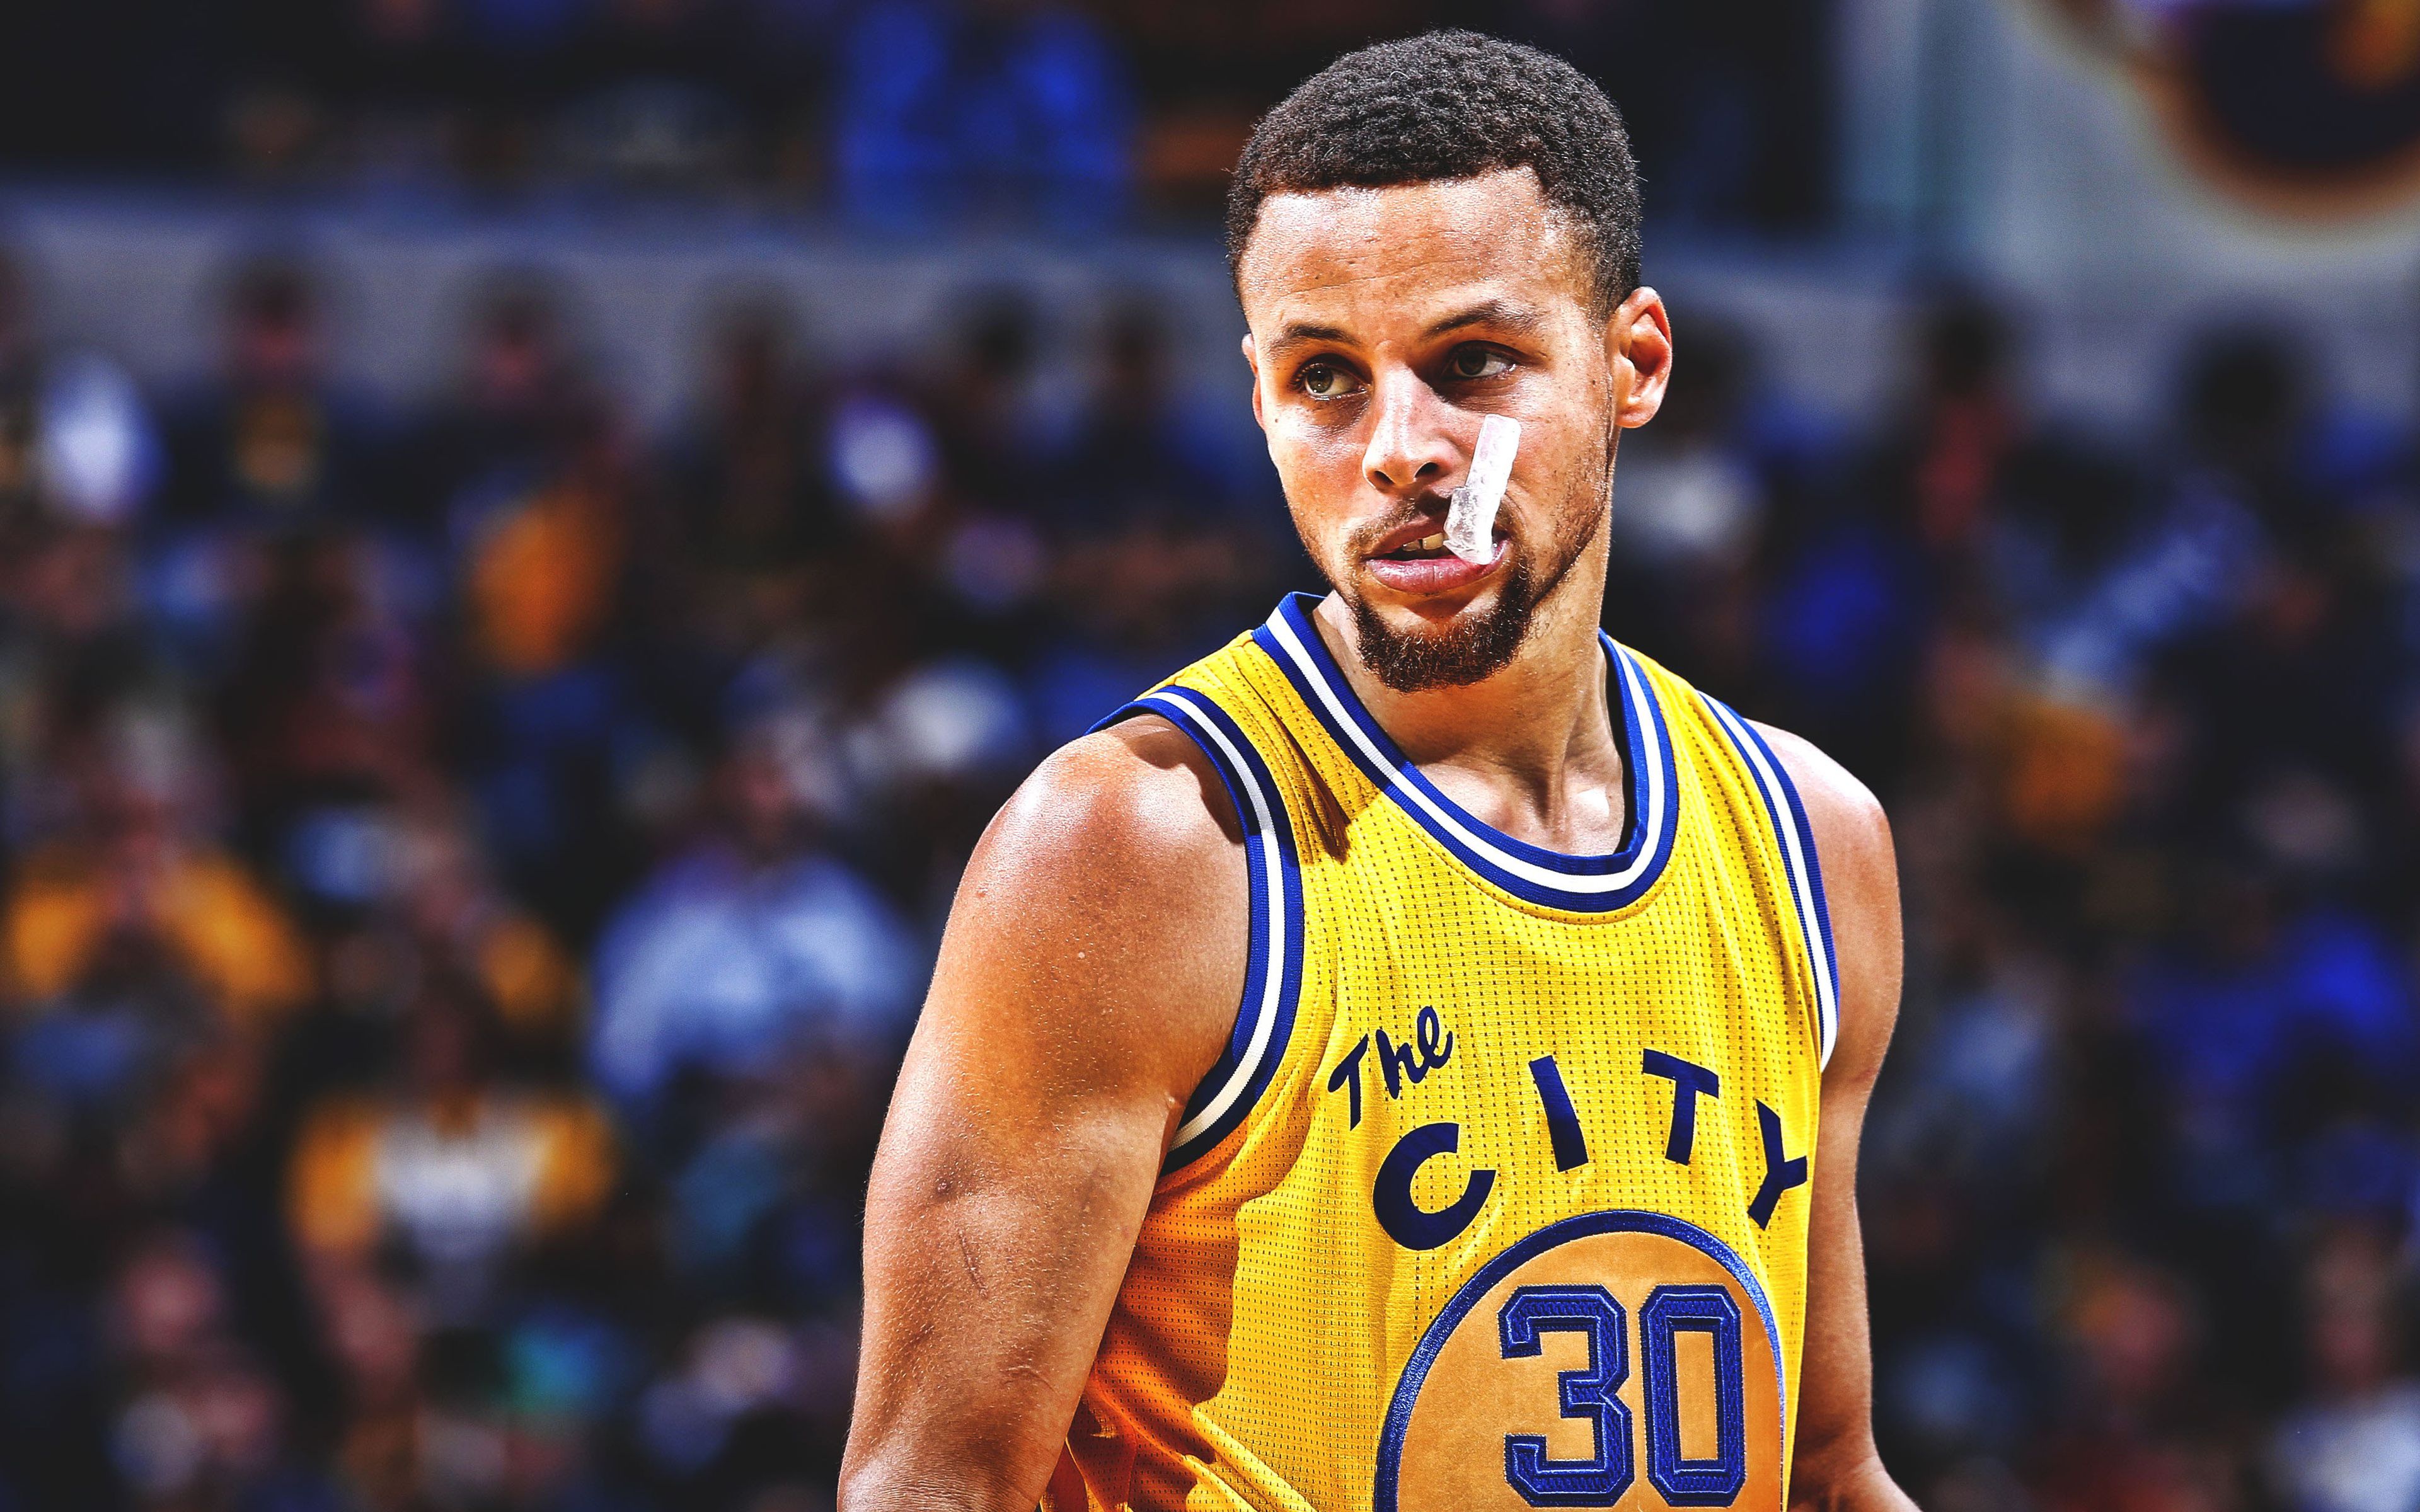 Stephen Curry 2020 Wallpapers - Wallpaper Cave